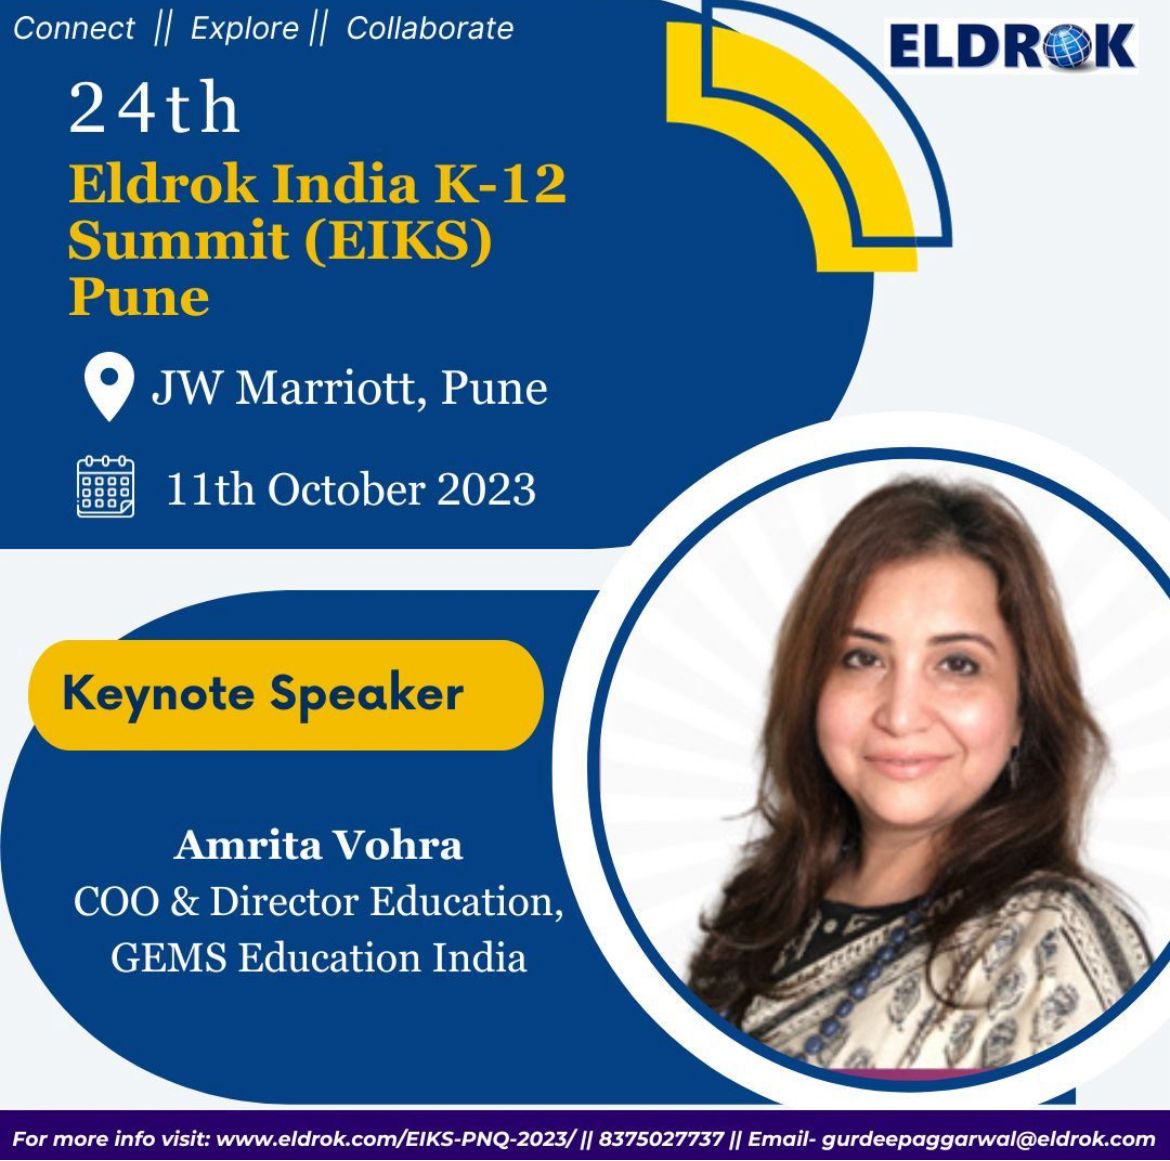 We are delighted to have our Keynote Speaker Dr Amrita Vohra at Eldrok India K-12 Summit (EIKS) on 11th October 2023 at JW Marriott, Pune.